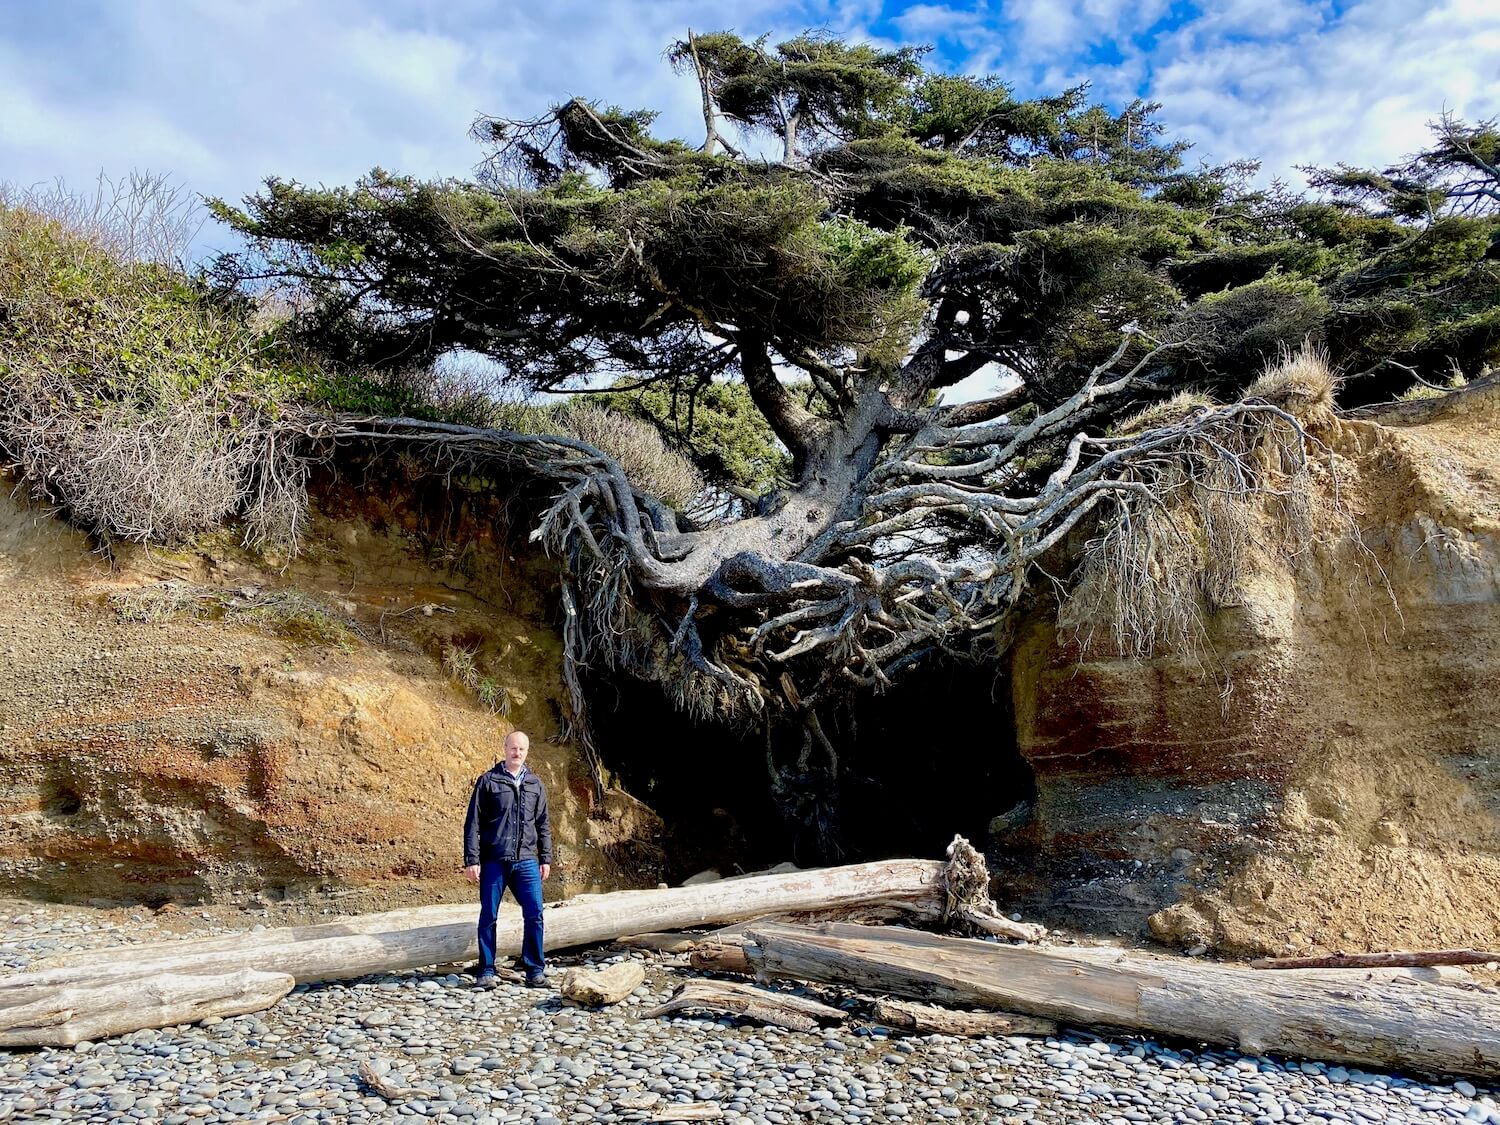 The tree of life straddles two sides of a beach side ravine with a cave like opening underneath. This part of the Washignton Coast has sand and drift logs and the sky a mix of blue and clouds. Matthew Kessi stands near the entrance to the cave area under the massive roots of the tree, struggling to keep alive.